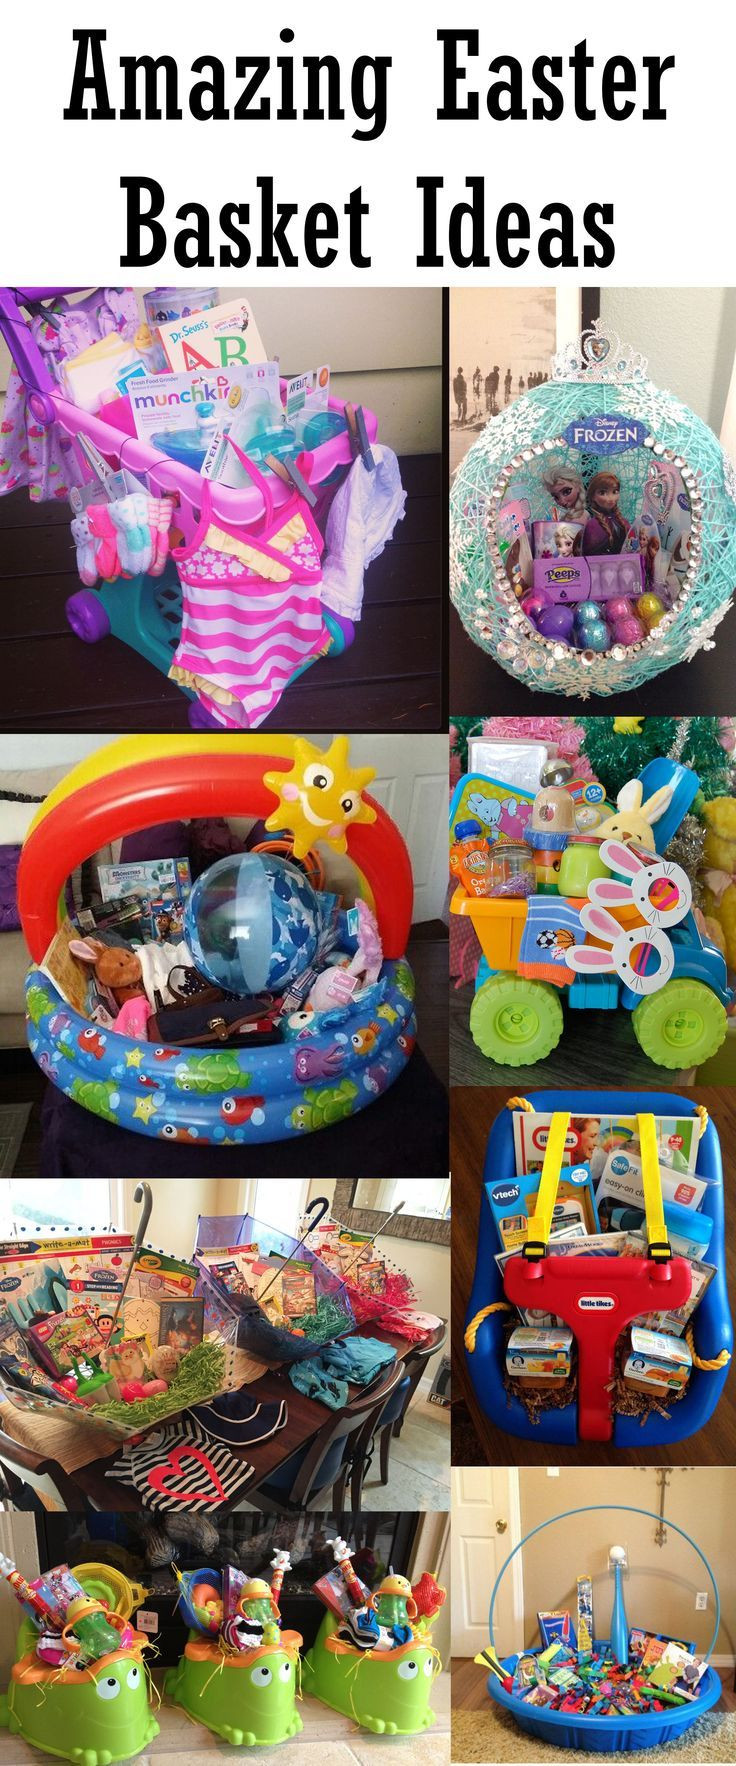 Easter Gifts For Kids
 Amazing Easter Basket Ideas